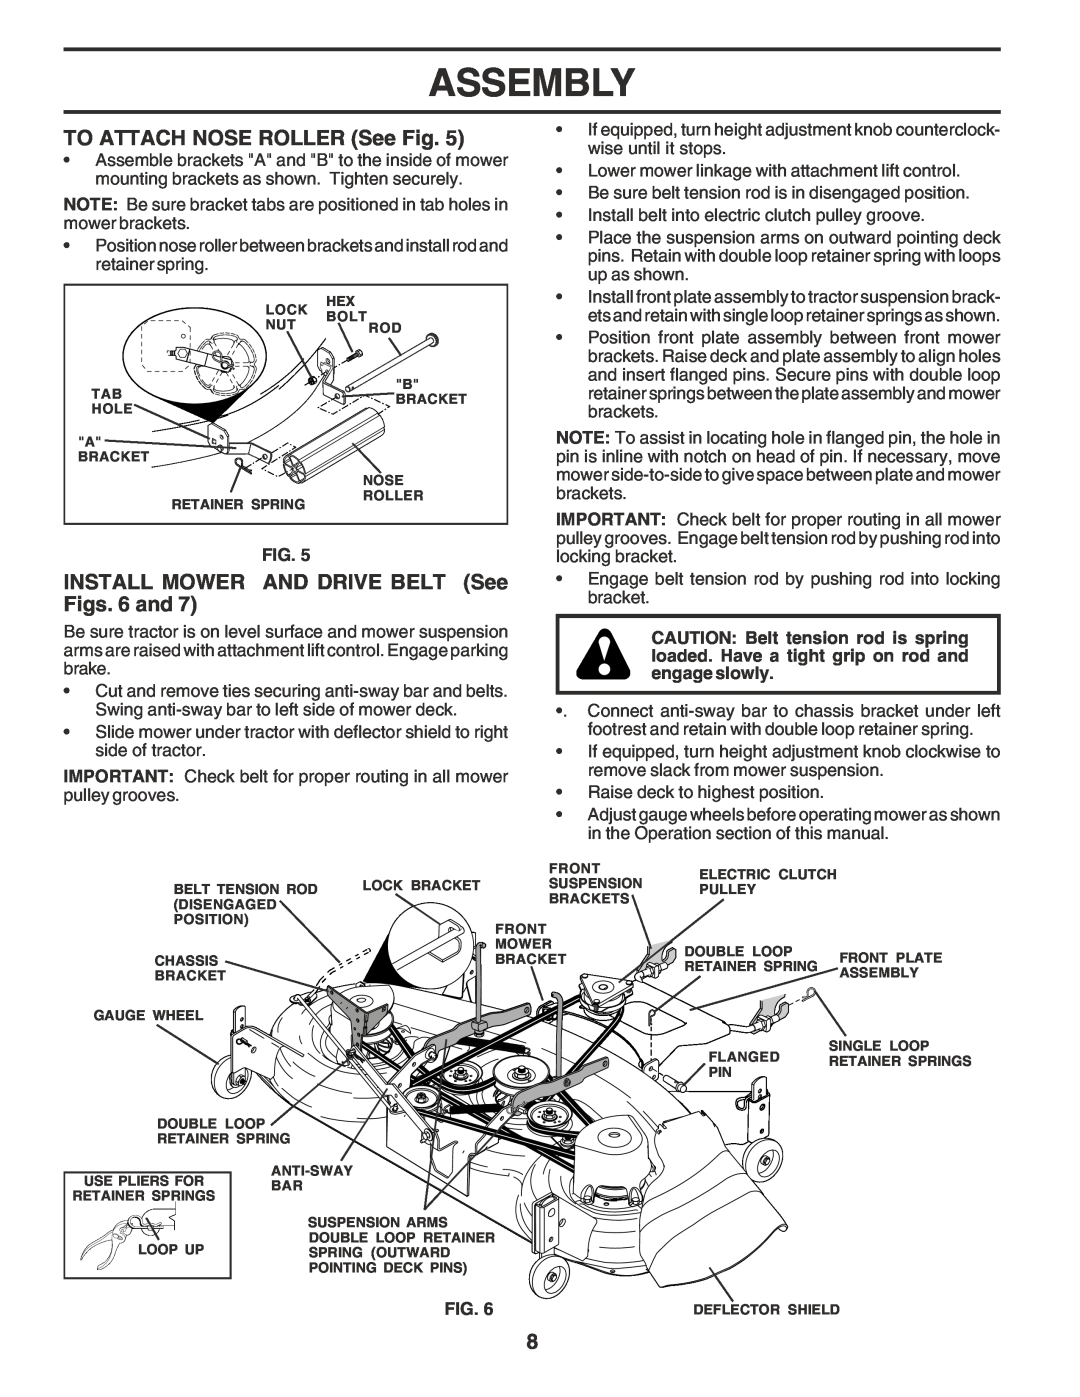 Poulan 183050 owner manual TO ATTACH NOSE ROLLER See Fig, INSTALL MOWER AND DRIVE BELT See Figs. 6 and, Assembly 